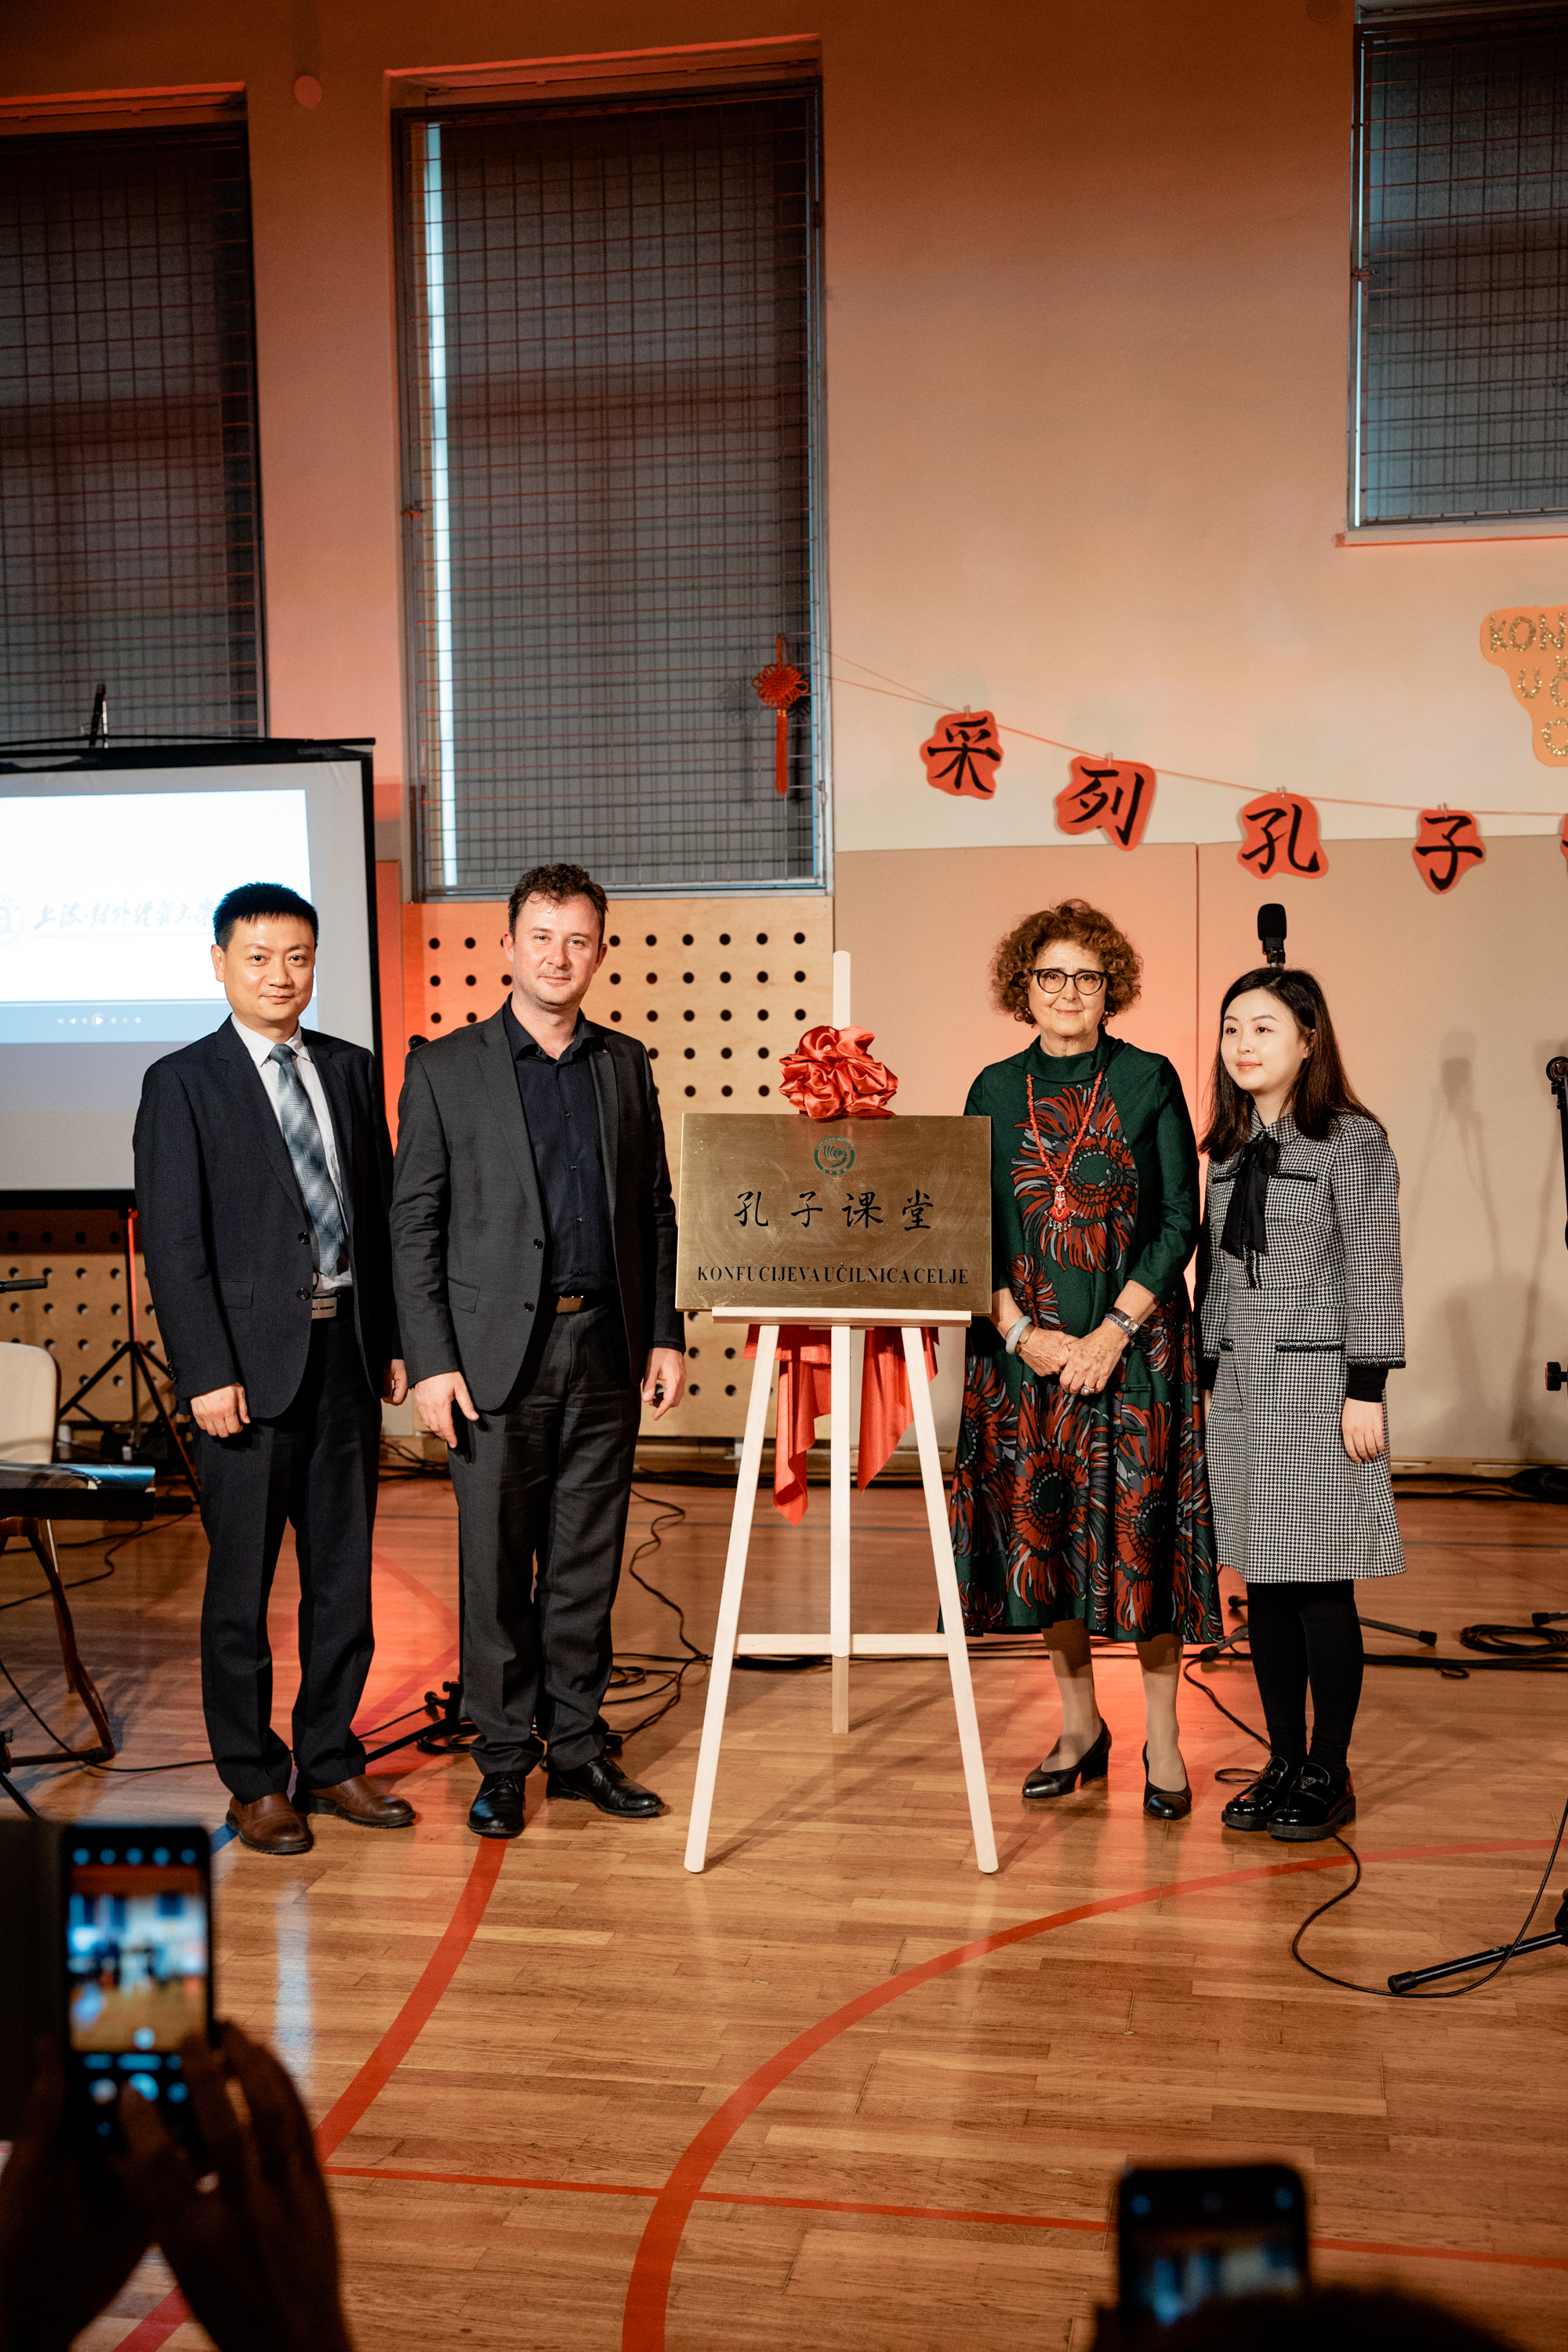 Official opening of Confucius Classroom Celje